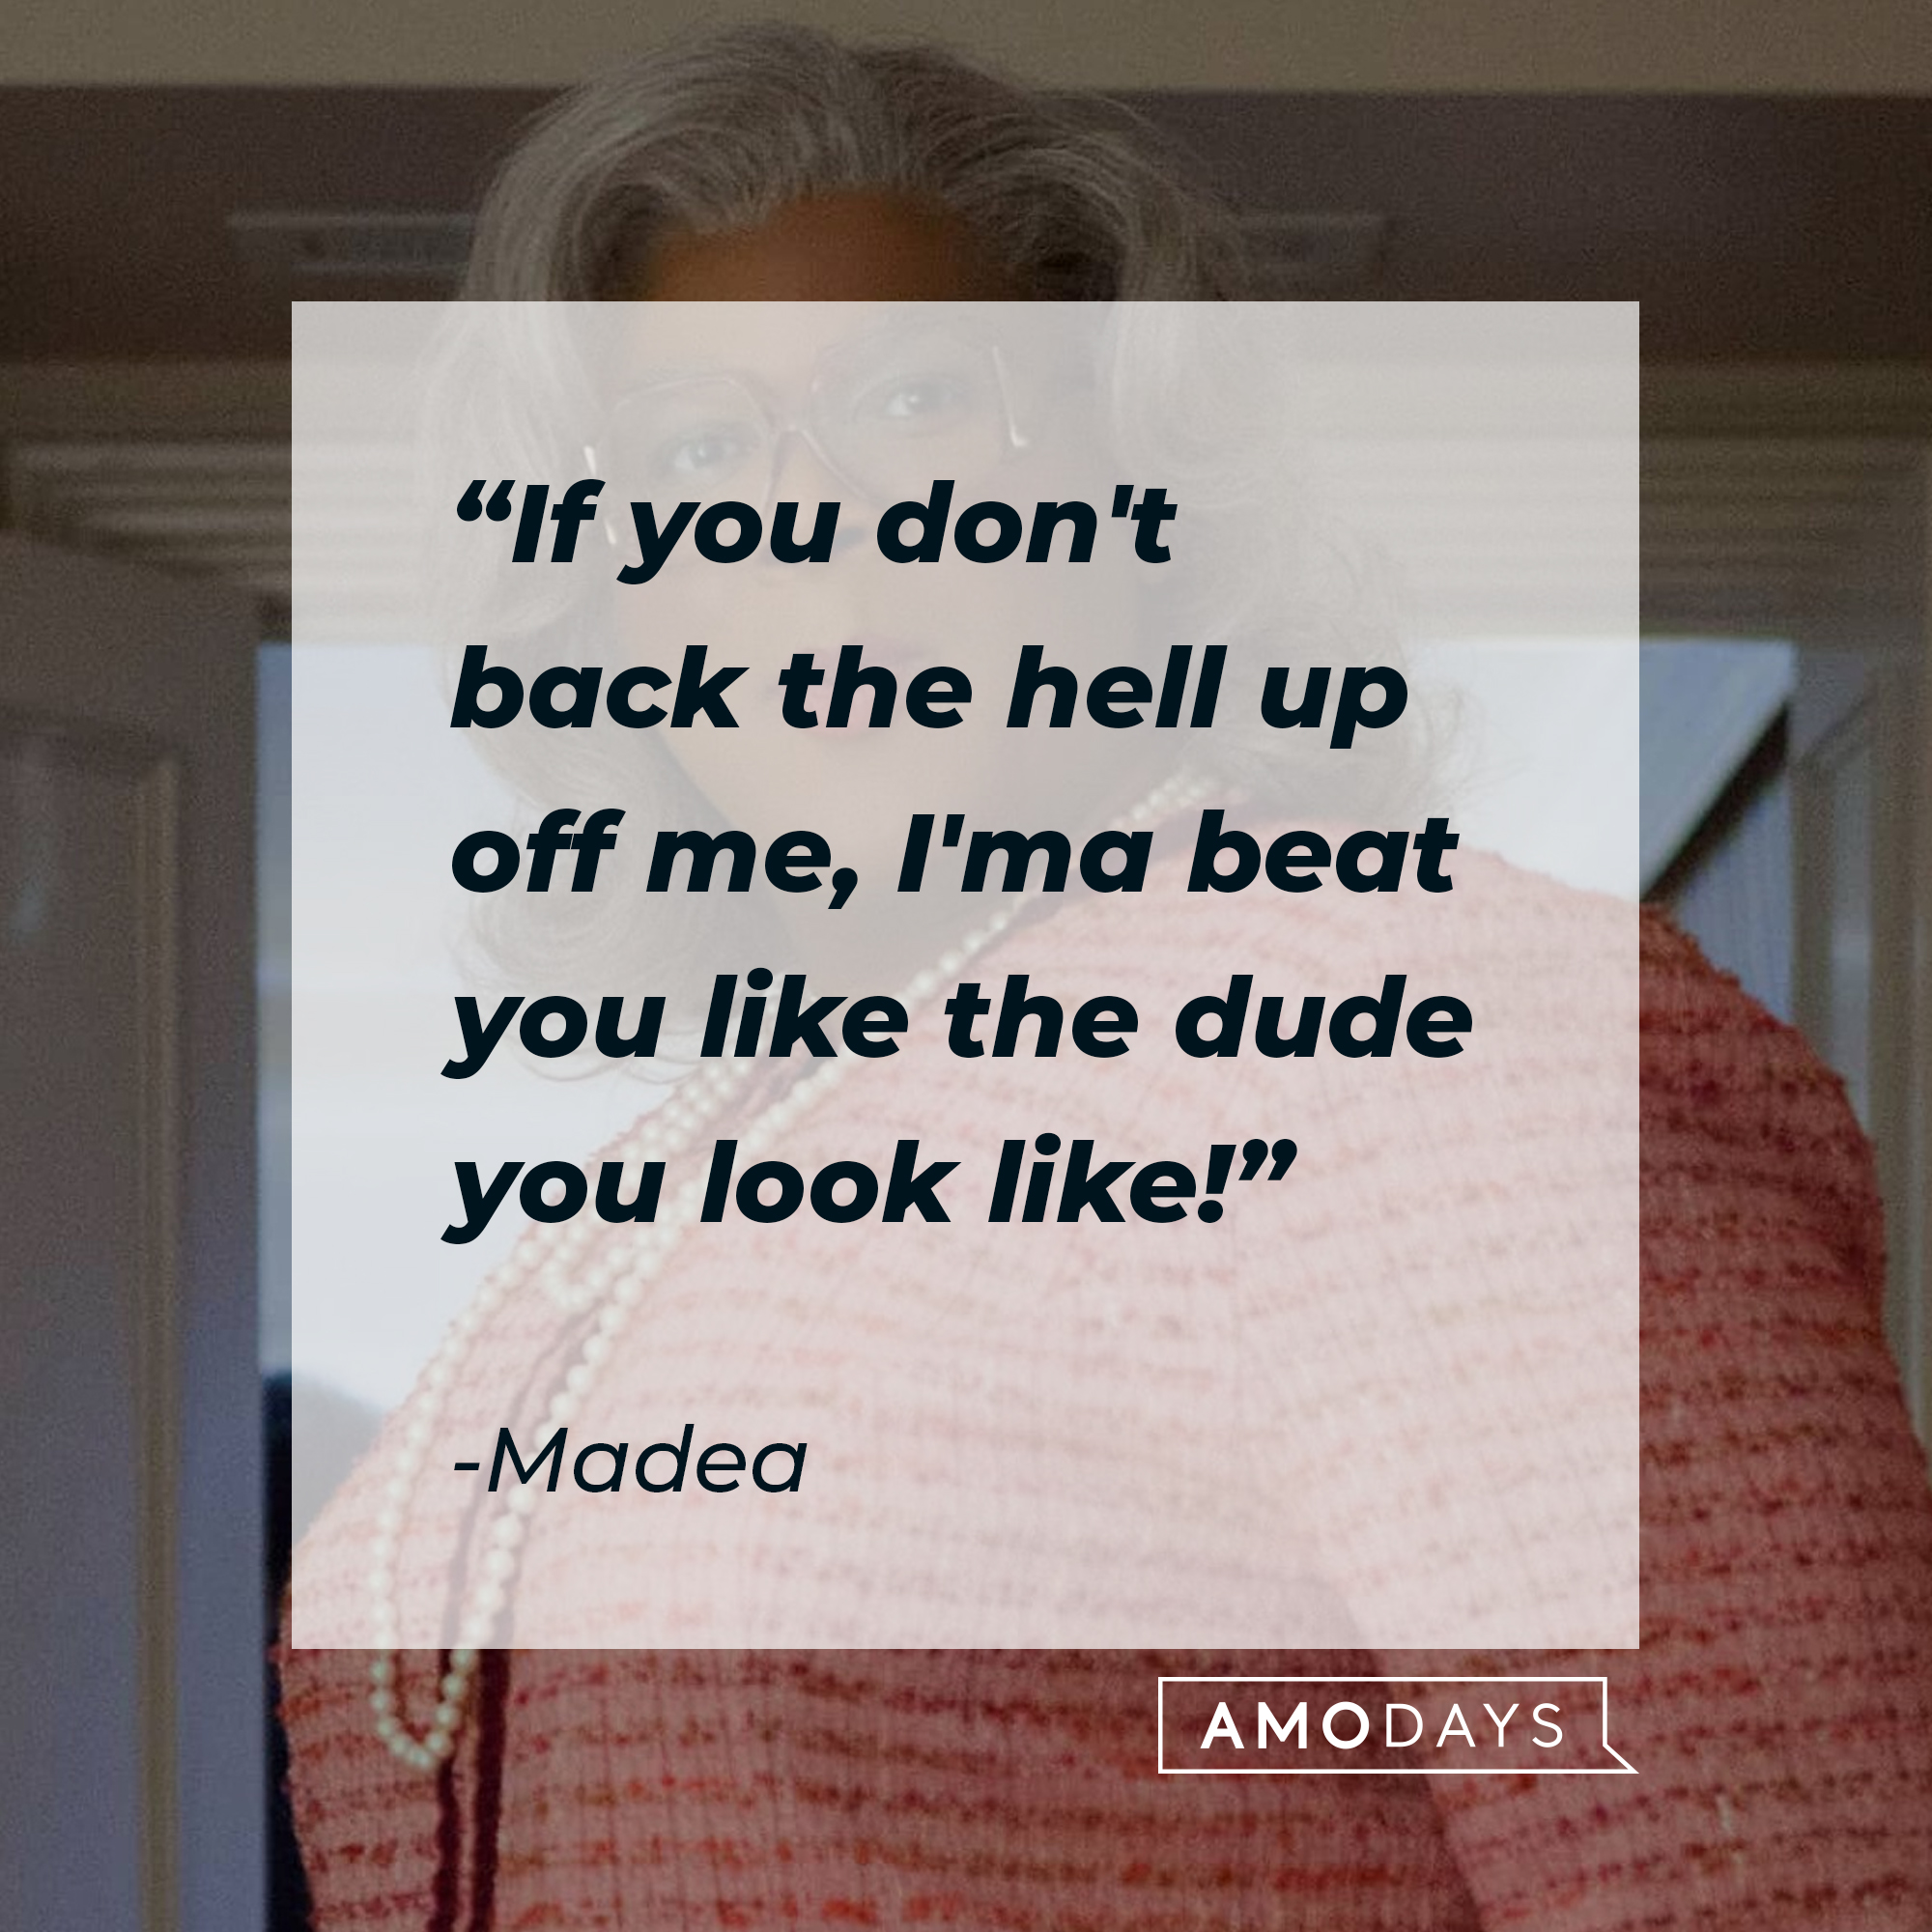 Madea's quote: "If you don't back the hell up off me, I'ma beat you like the dude you look like!" | Source: Facebook.com/madea